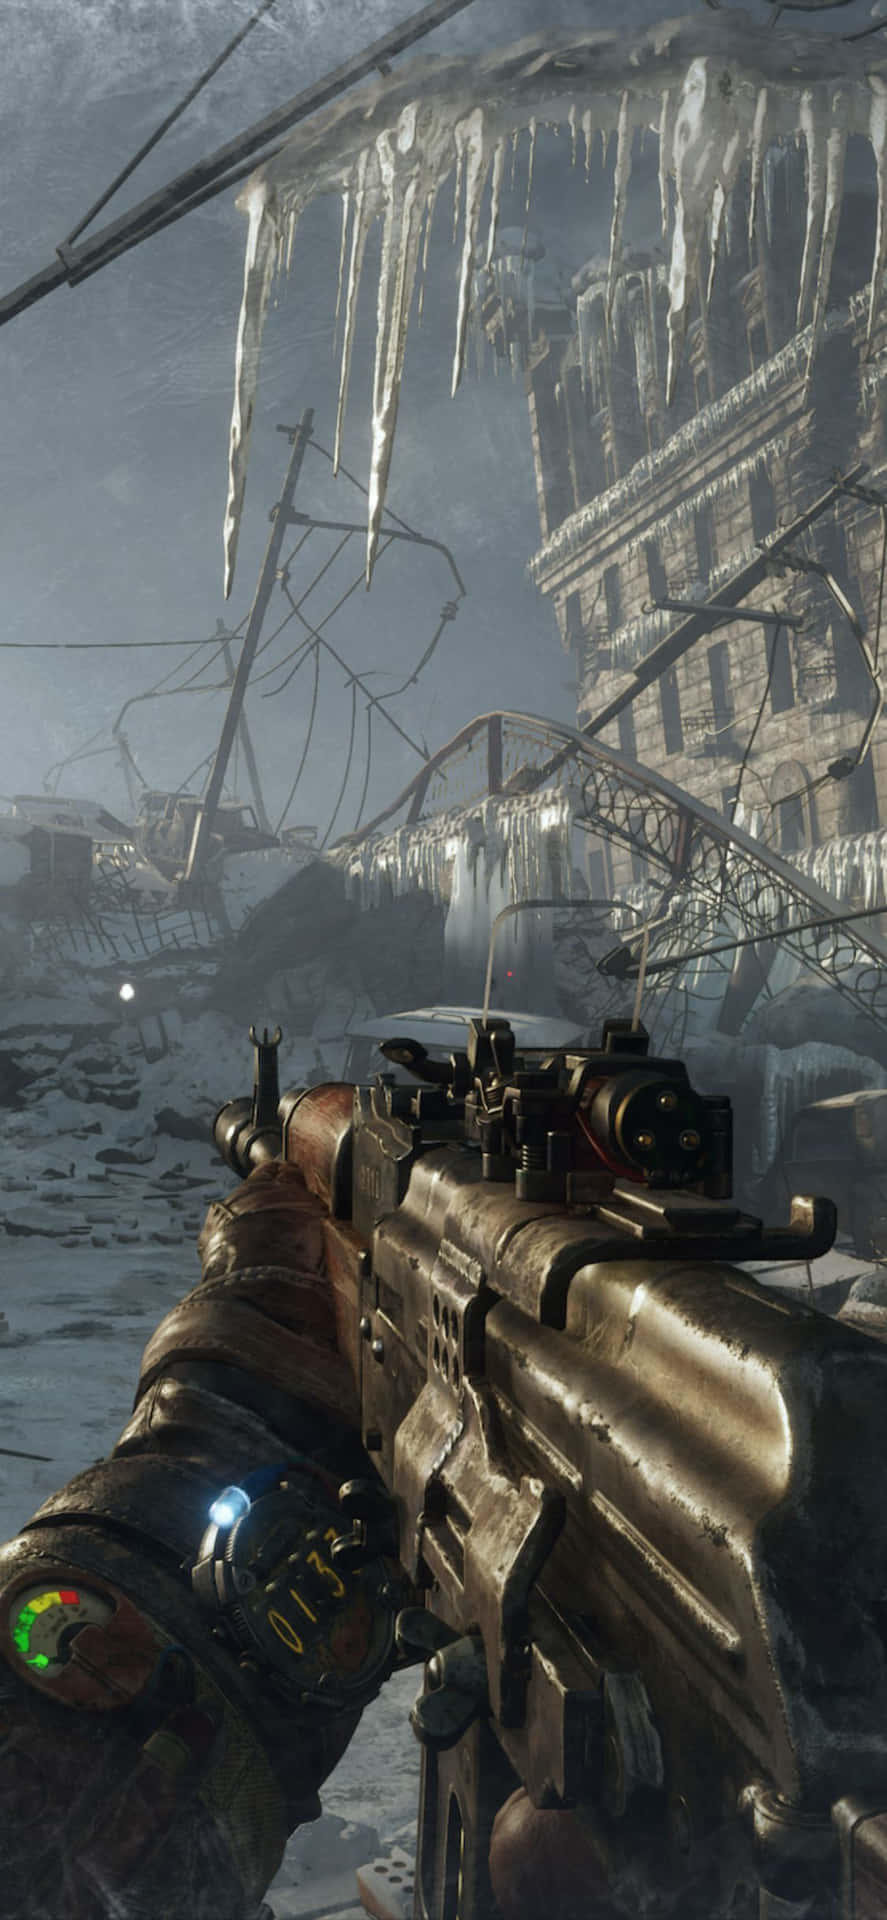 A Gun Is Shown In The Middle Of A Snowy Scene